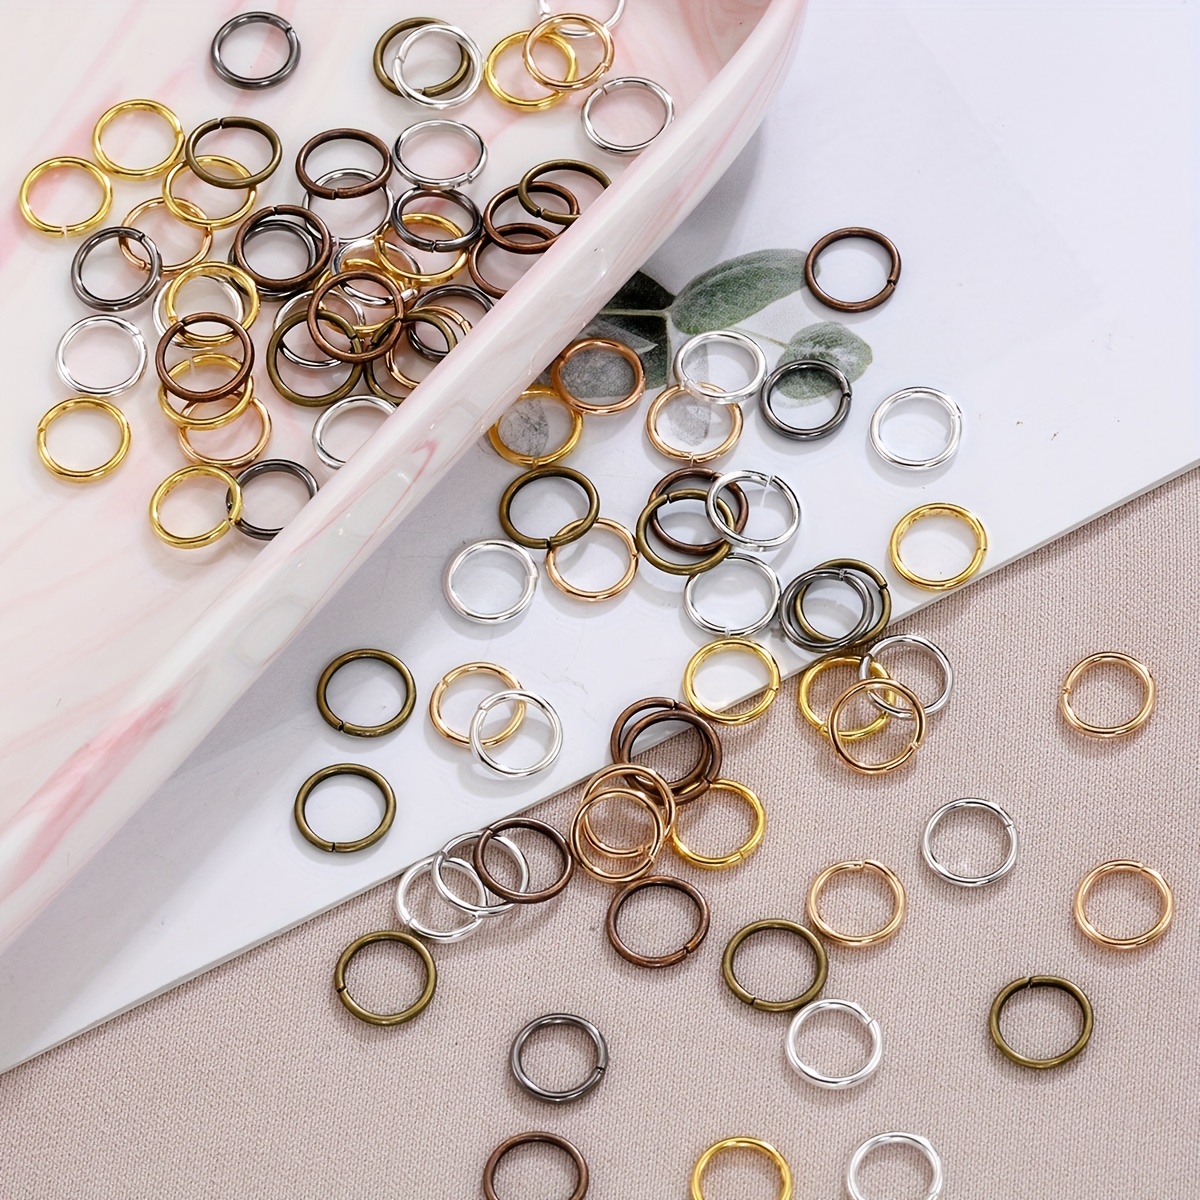 Open Jump Rings For Jewellery Making, 690pcs/set Metal O-Ring Silver  Connectors Rings, Mixed Size Jump Rings Split Key Ring Jewelry Supplies Kit